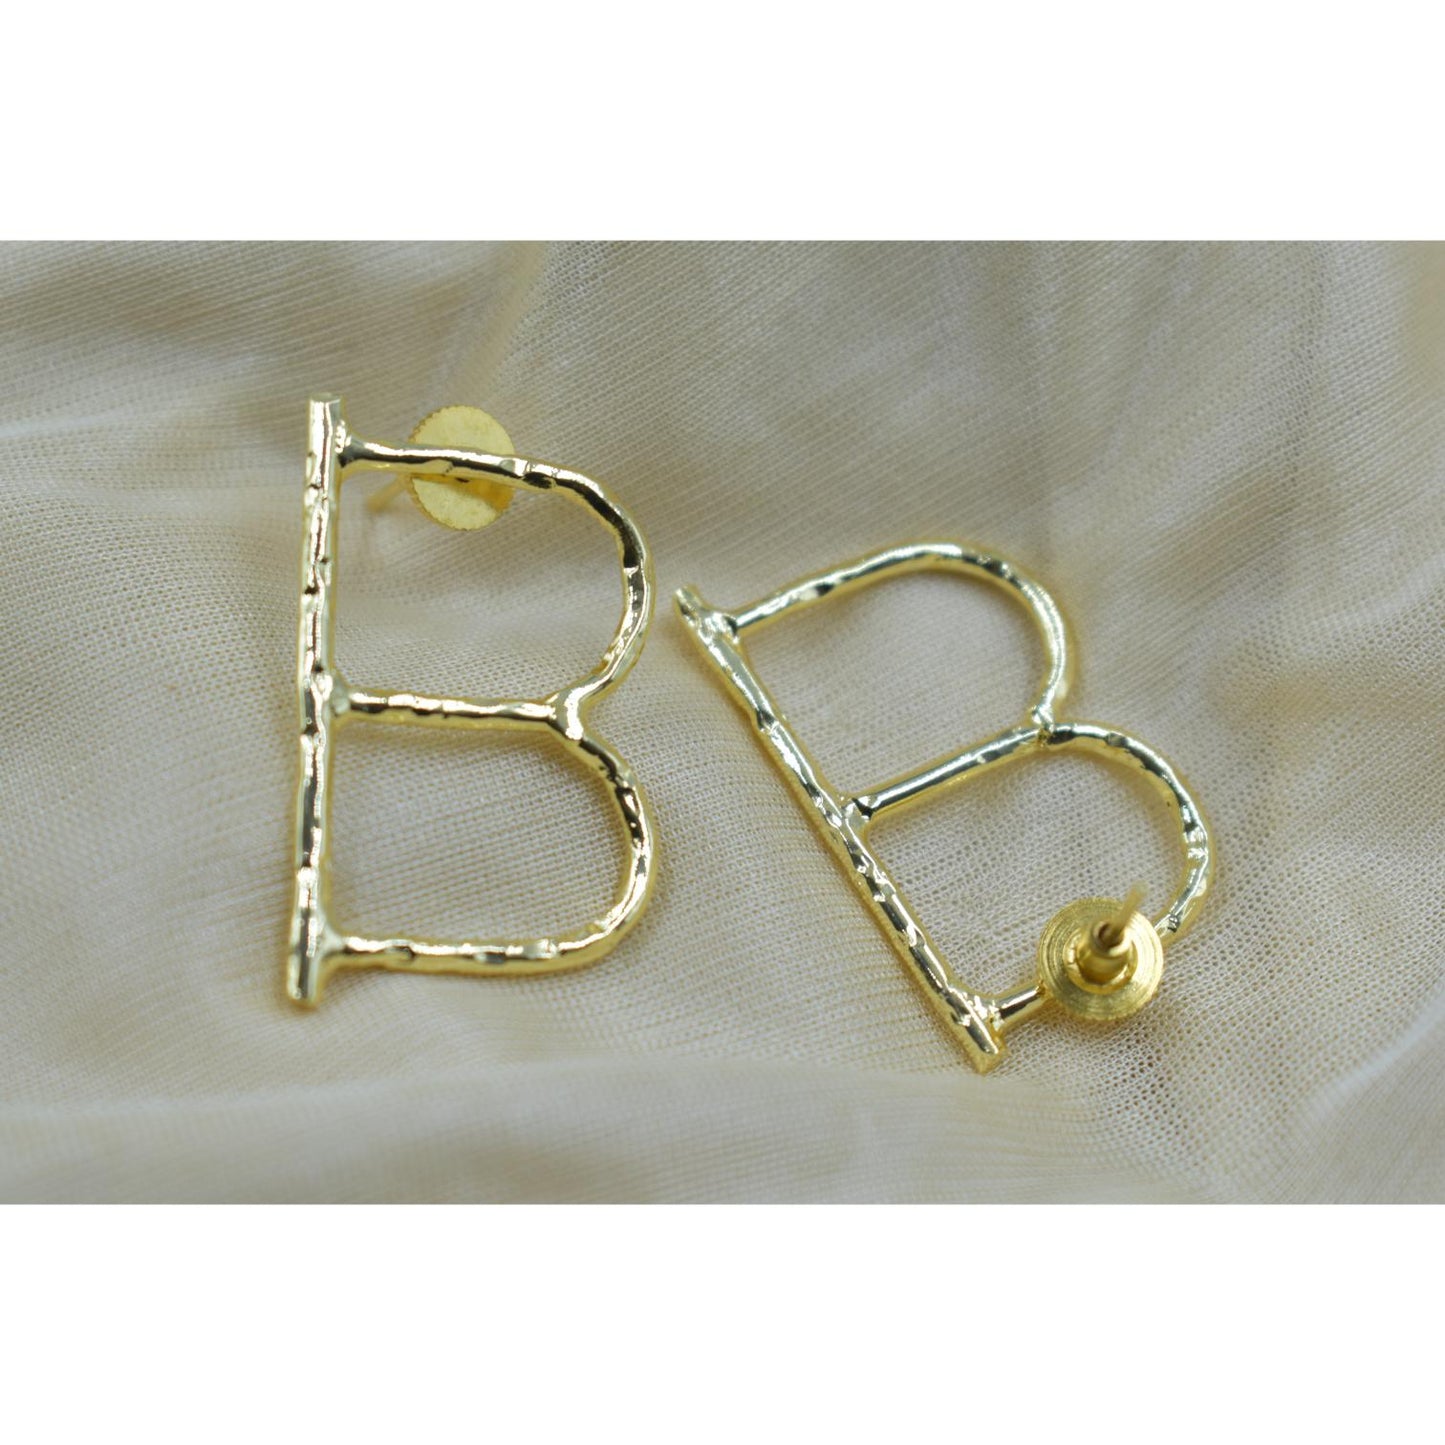 Pair of high quality alphabet stud earing